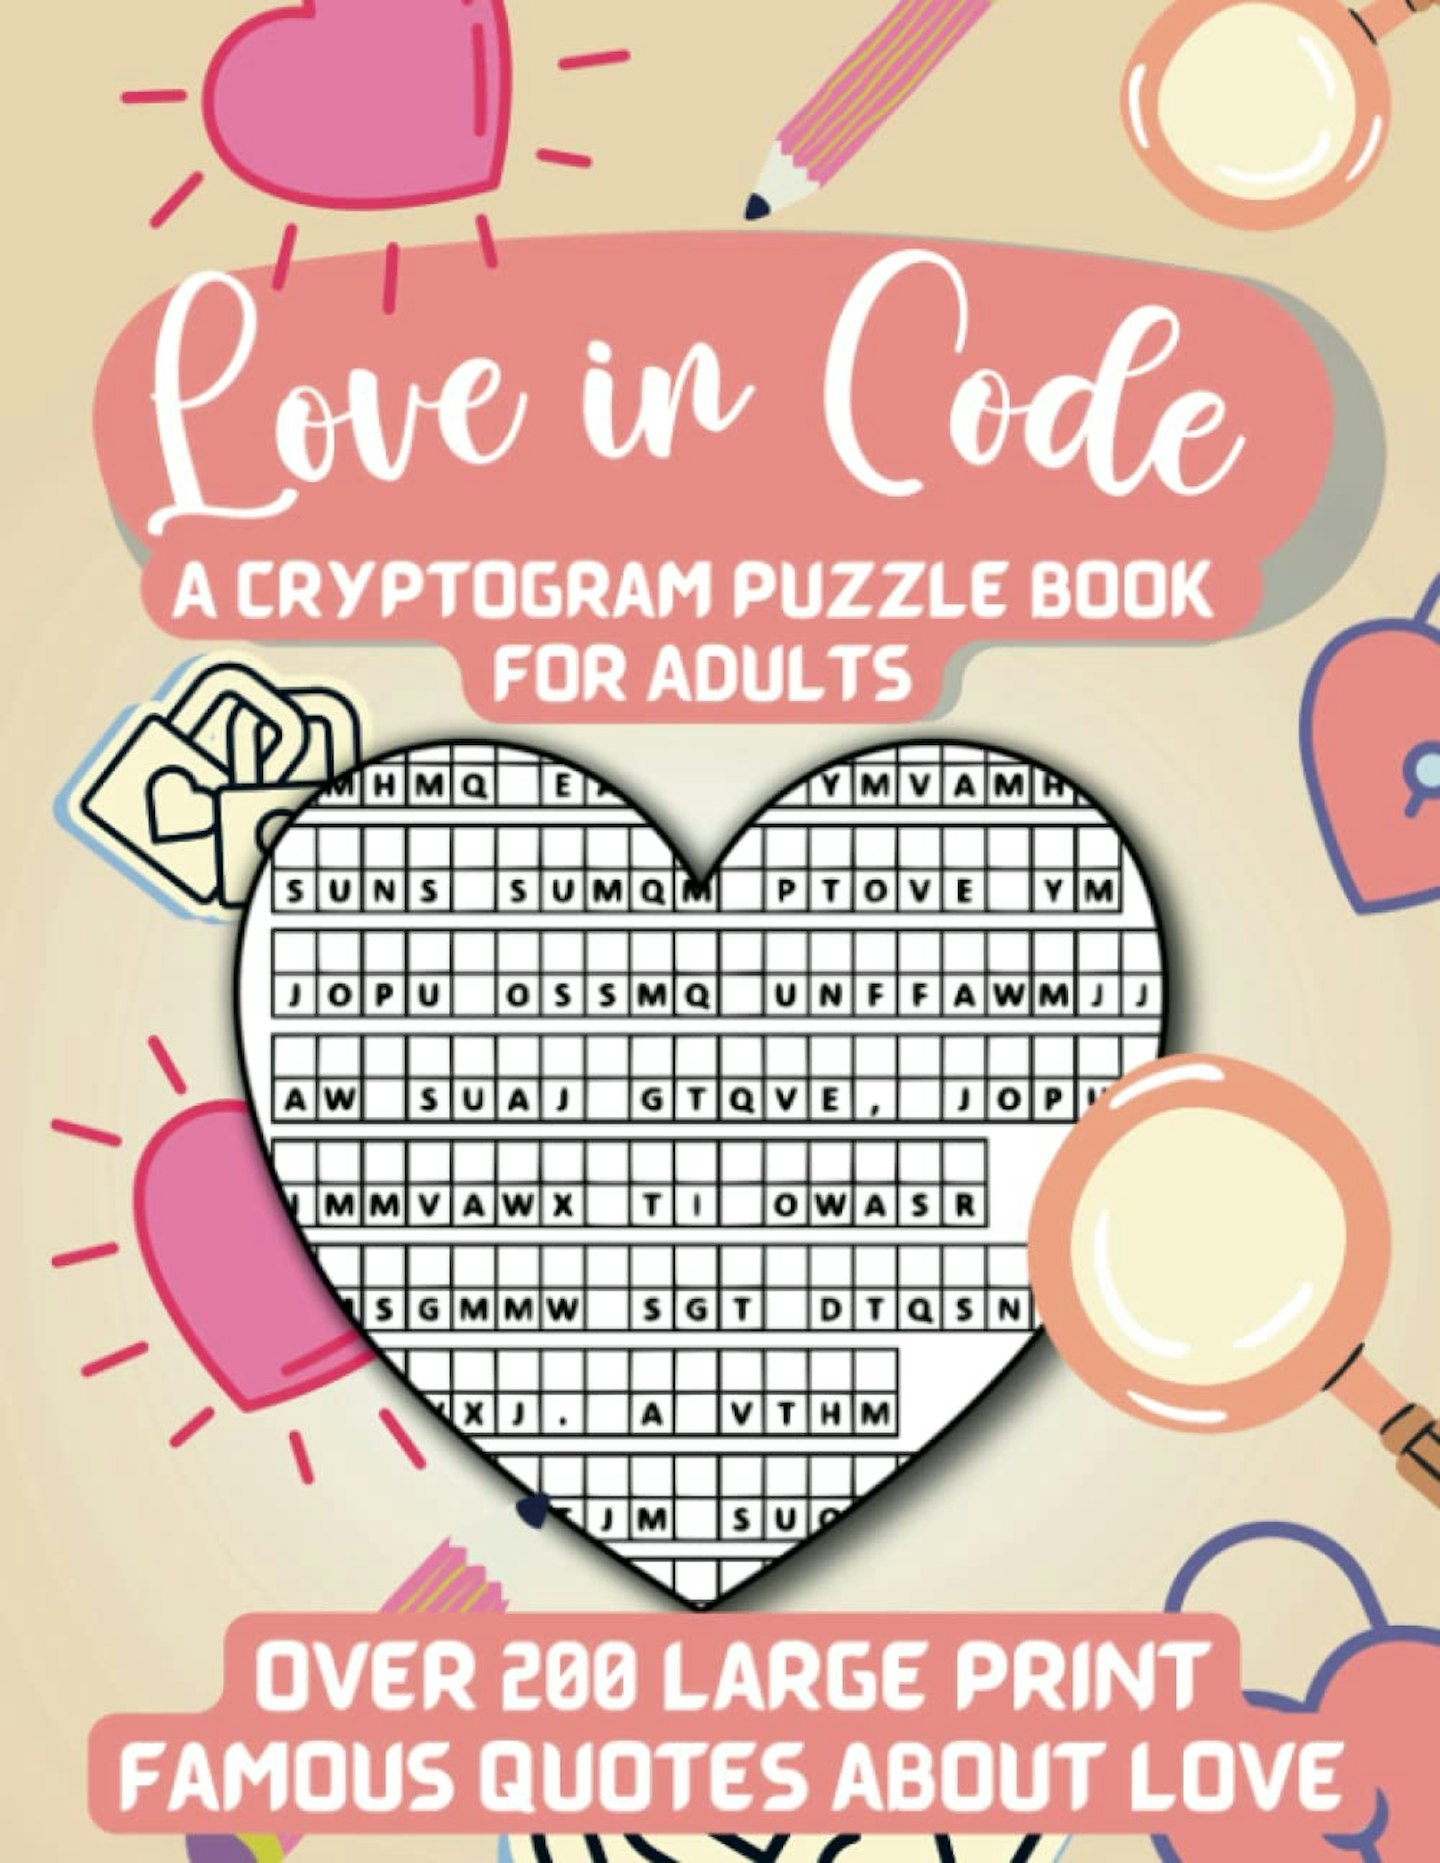 Love in Code: A Cryptogram Puzzle Book for Adults cover